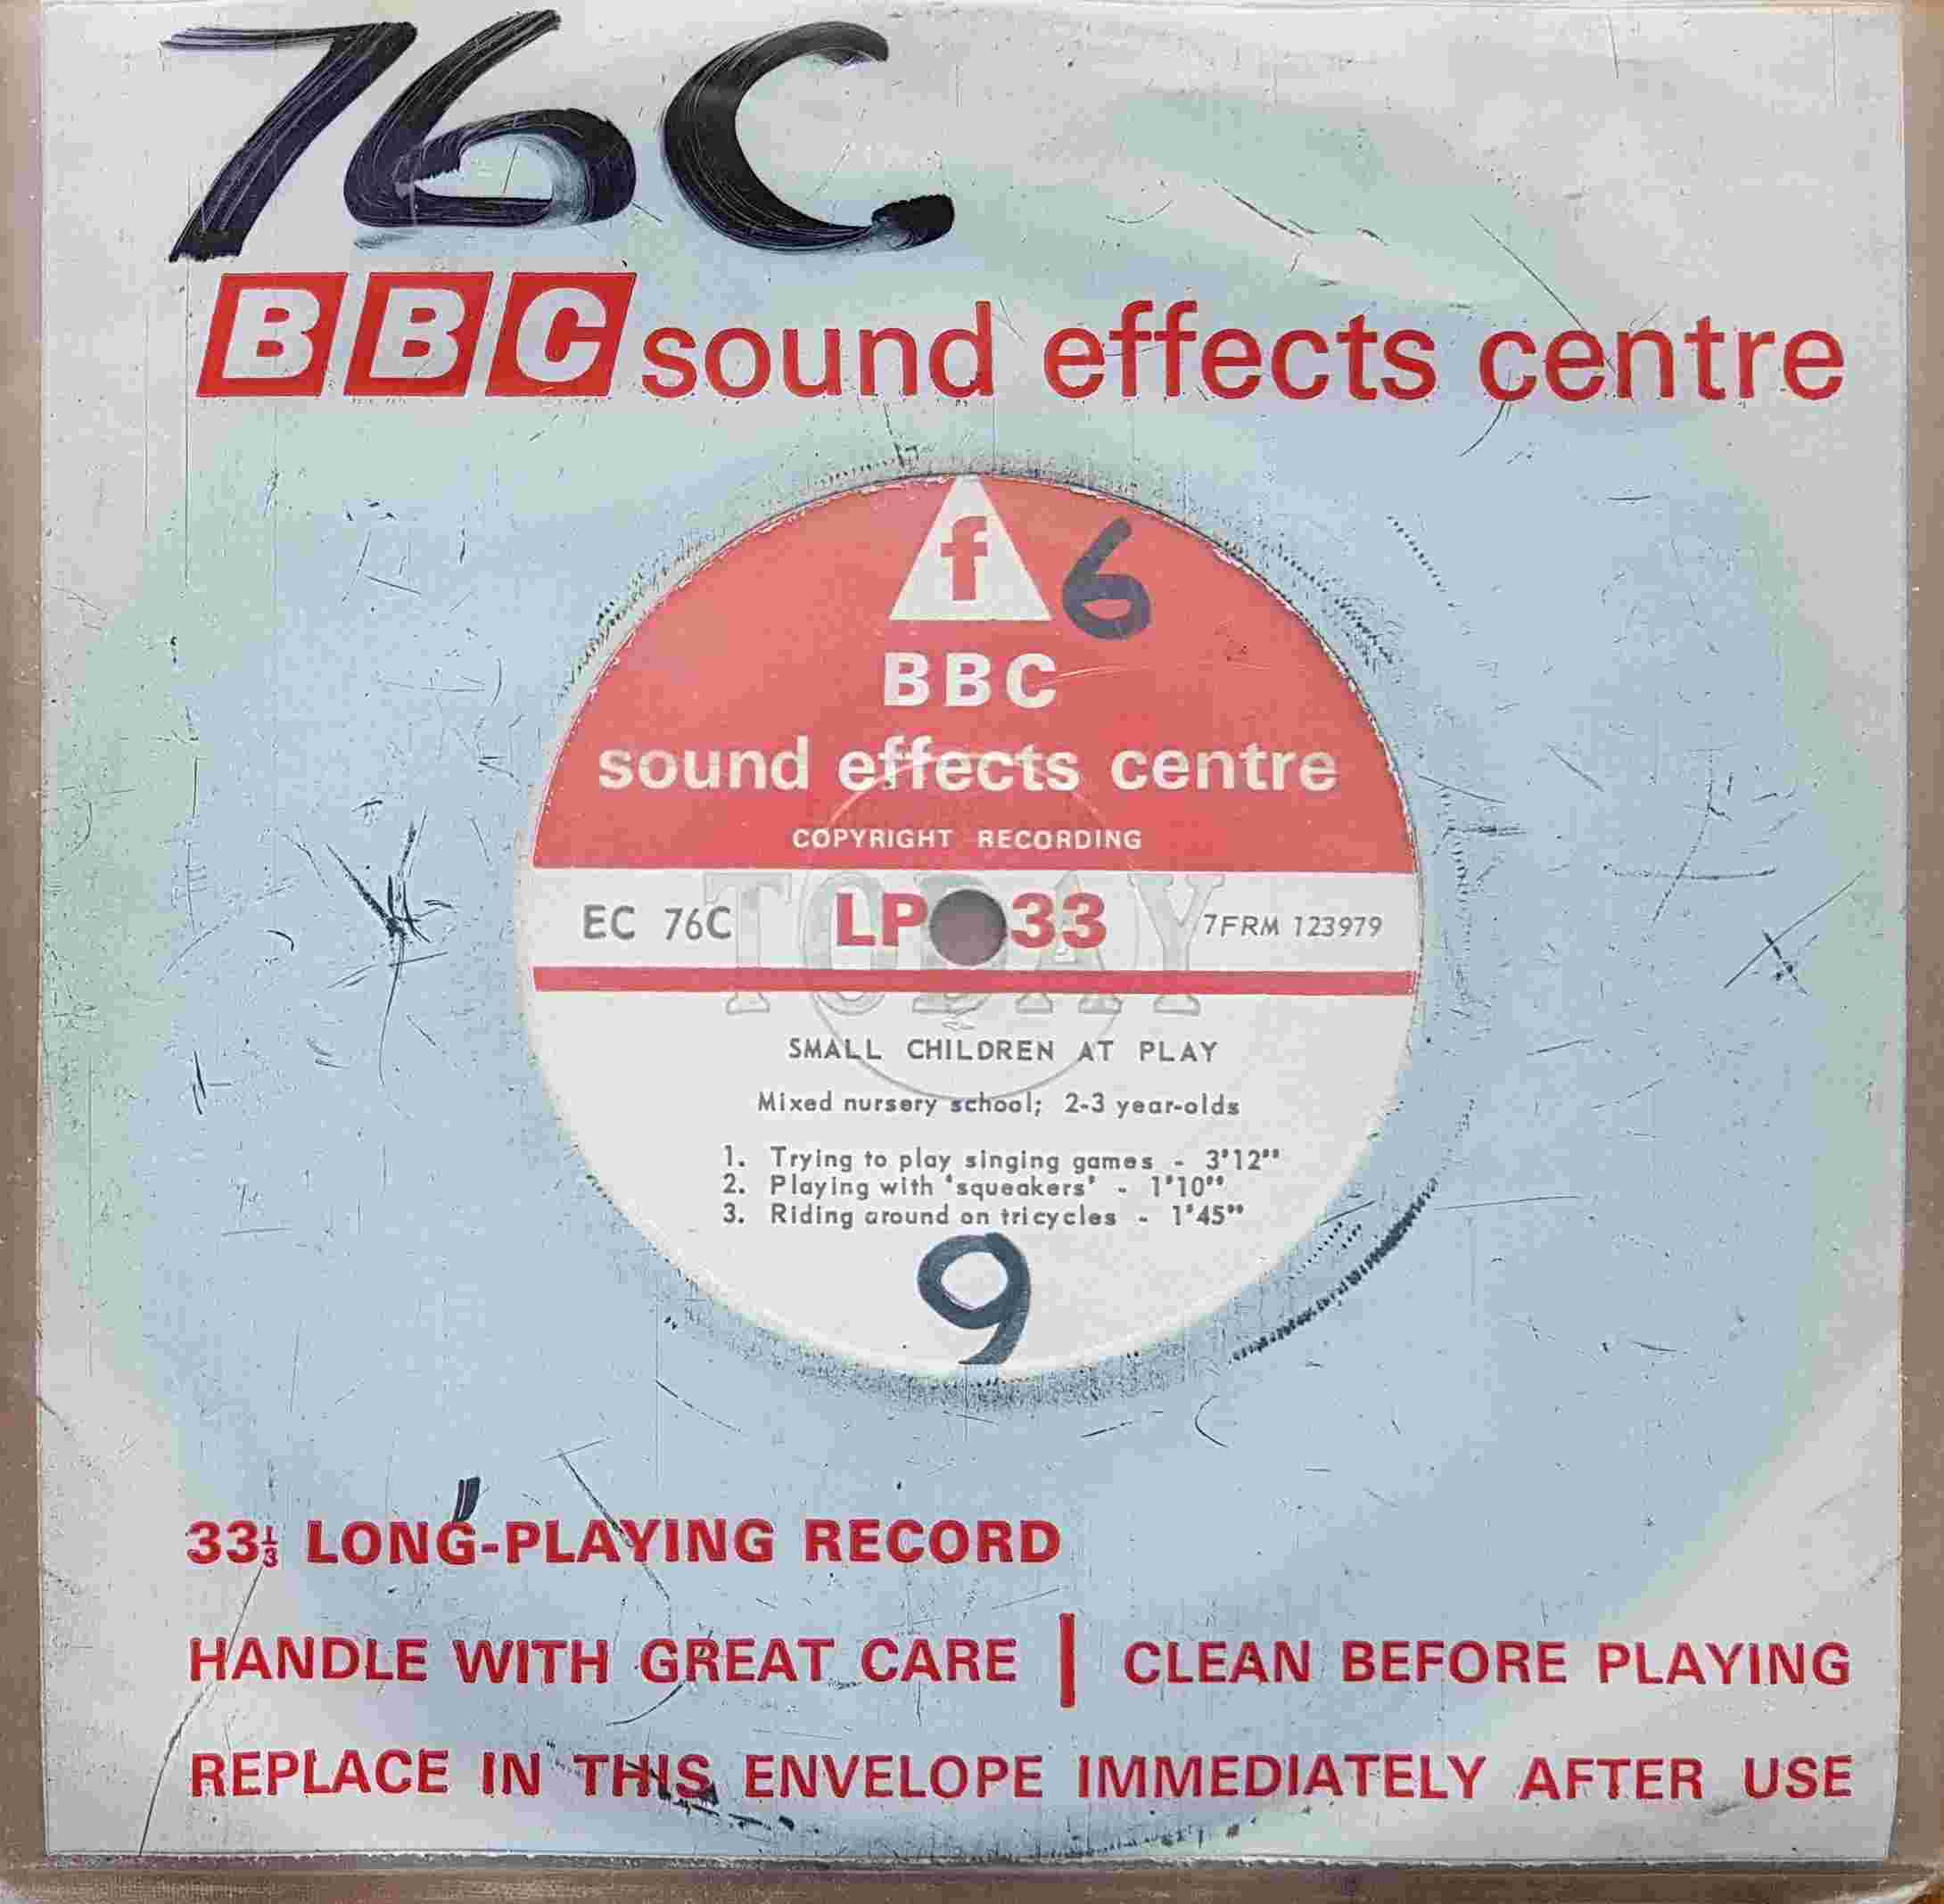 Picture of EC 76C Small children at play by artist Not registered from the BBC singles - Records and Tapes library